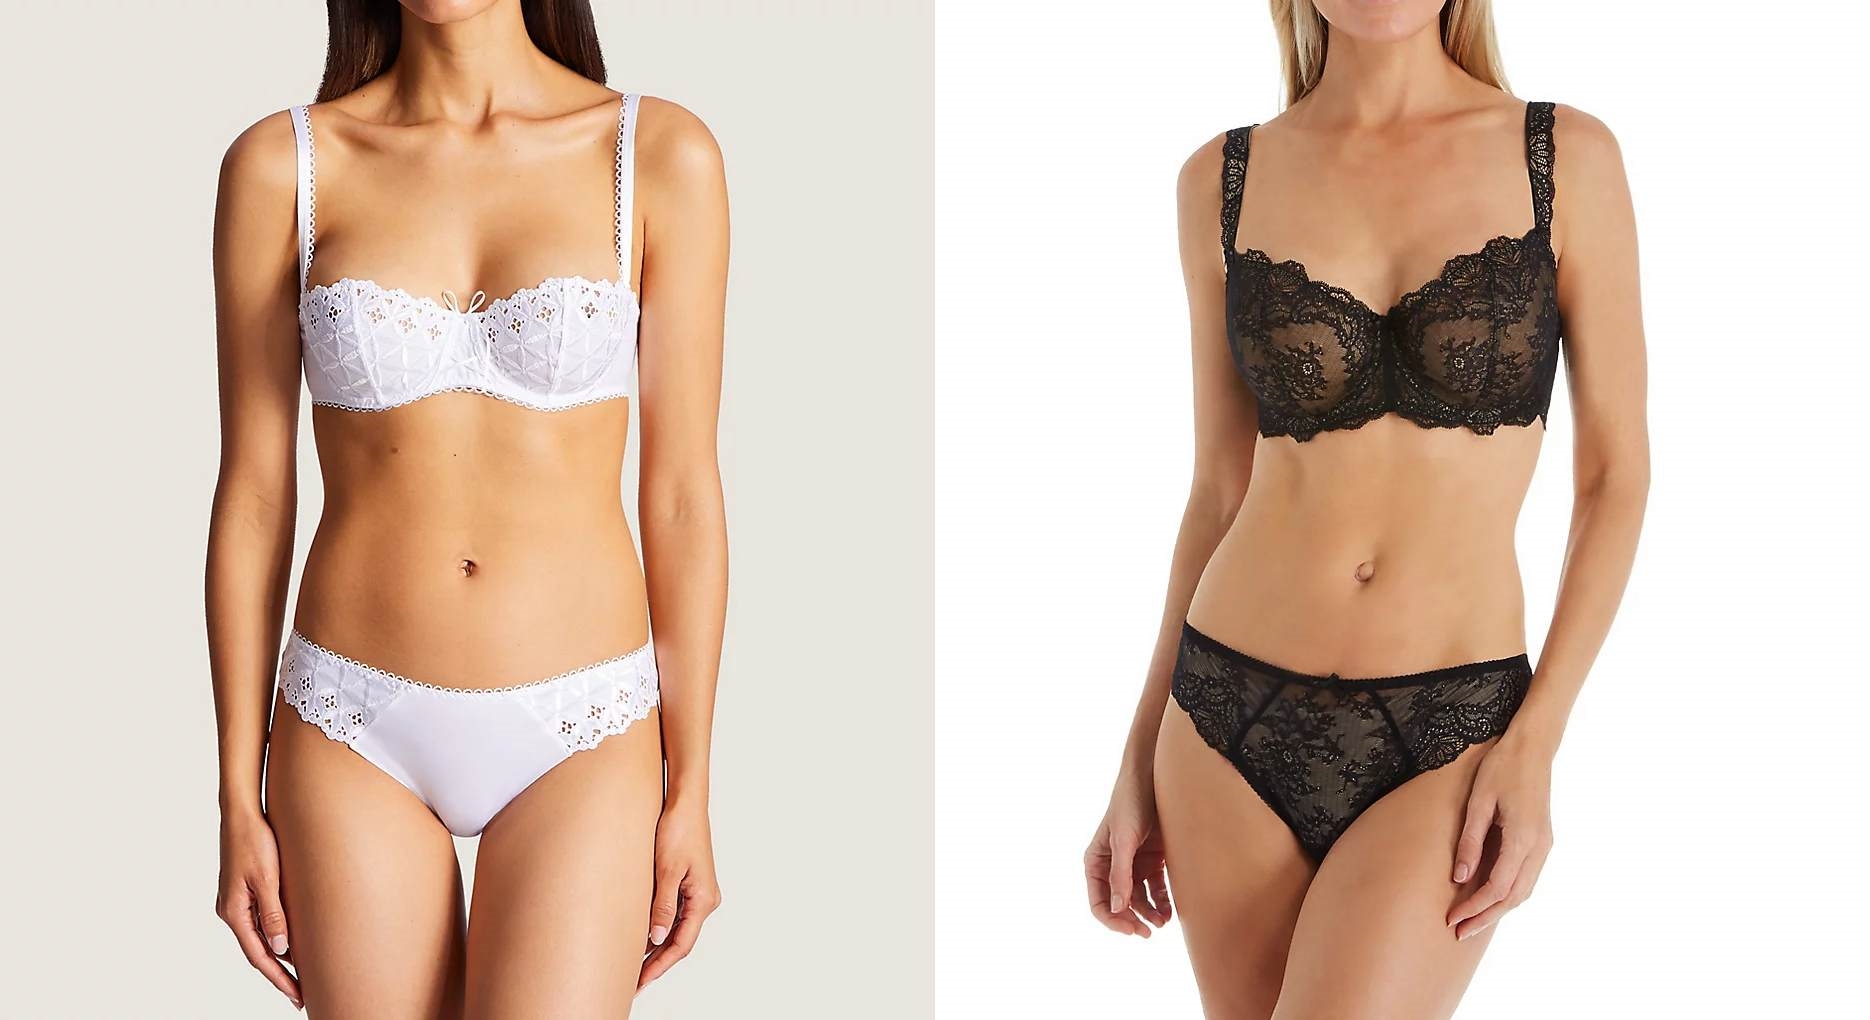 Mastering shopping for beautiful lingerie is easier than ever.